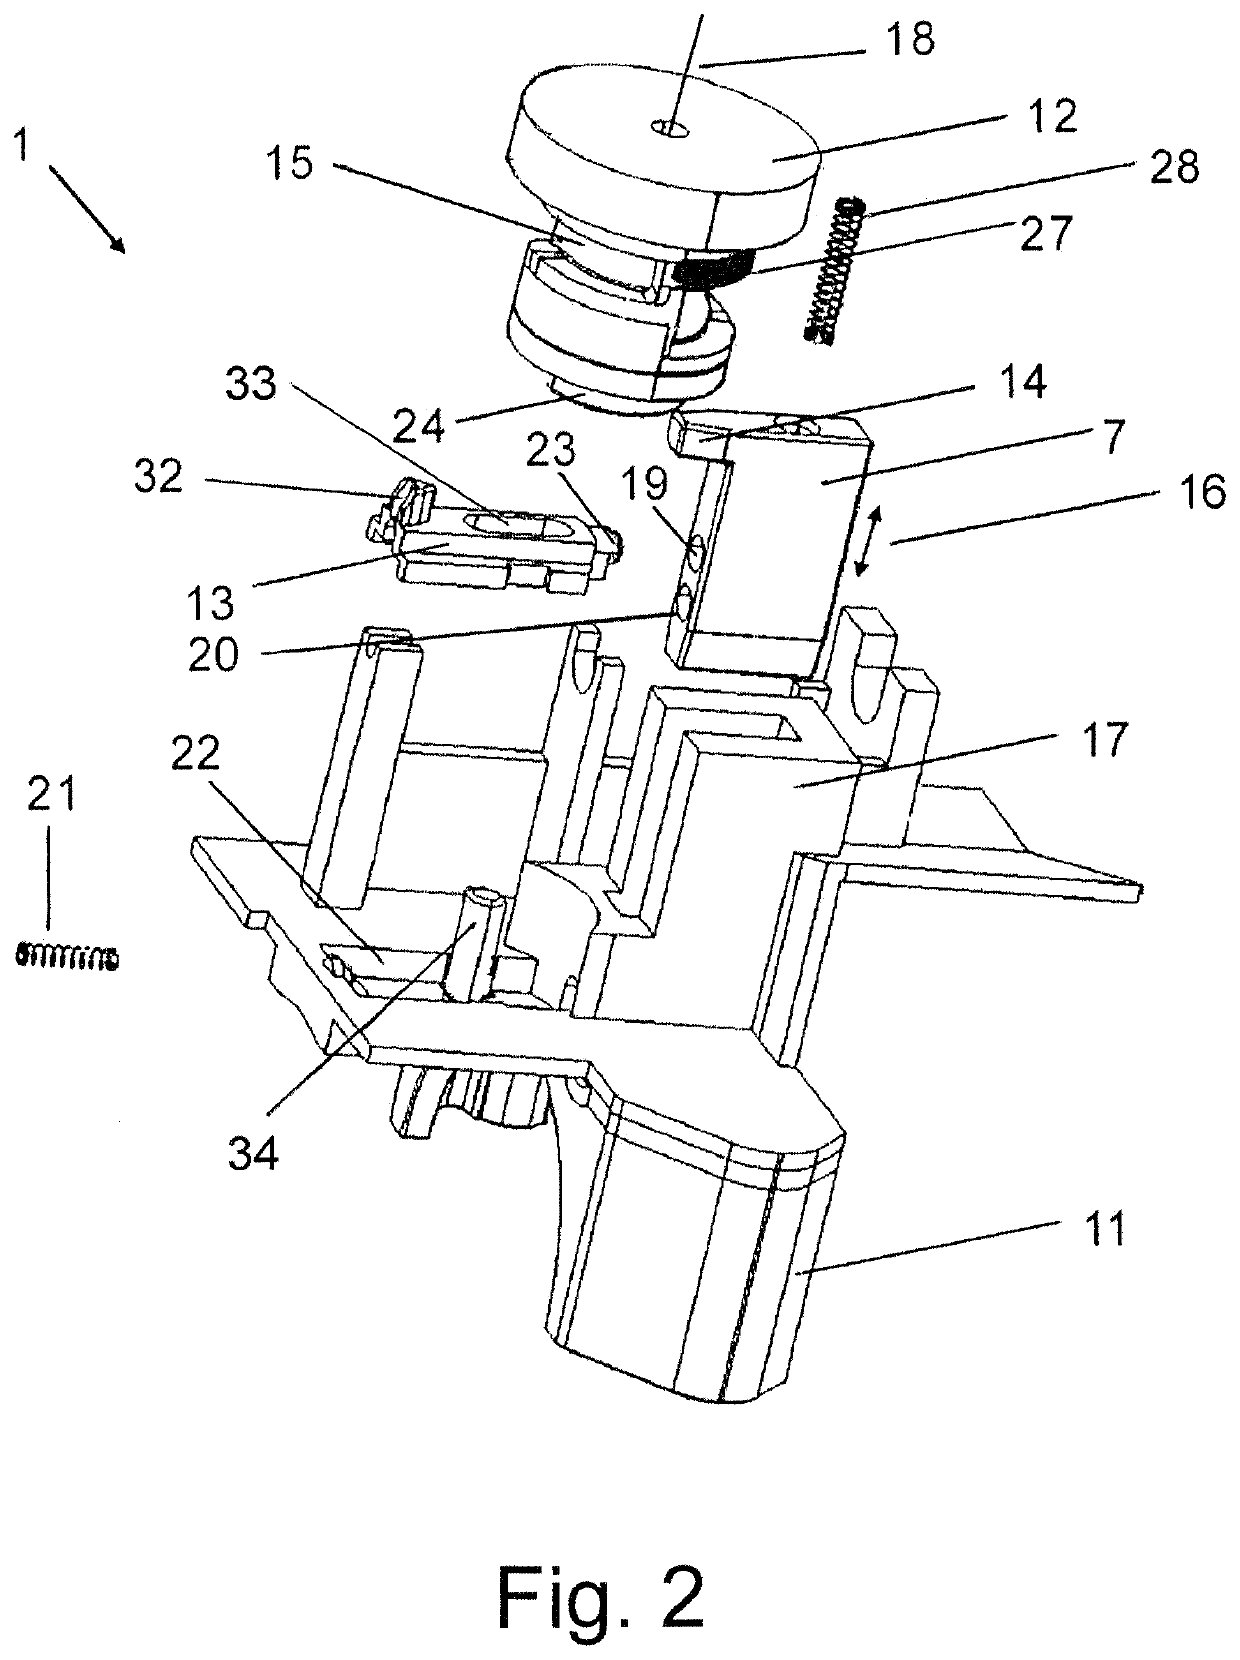 Locking device, in particular, for a motor vehicle